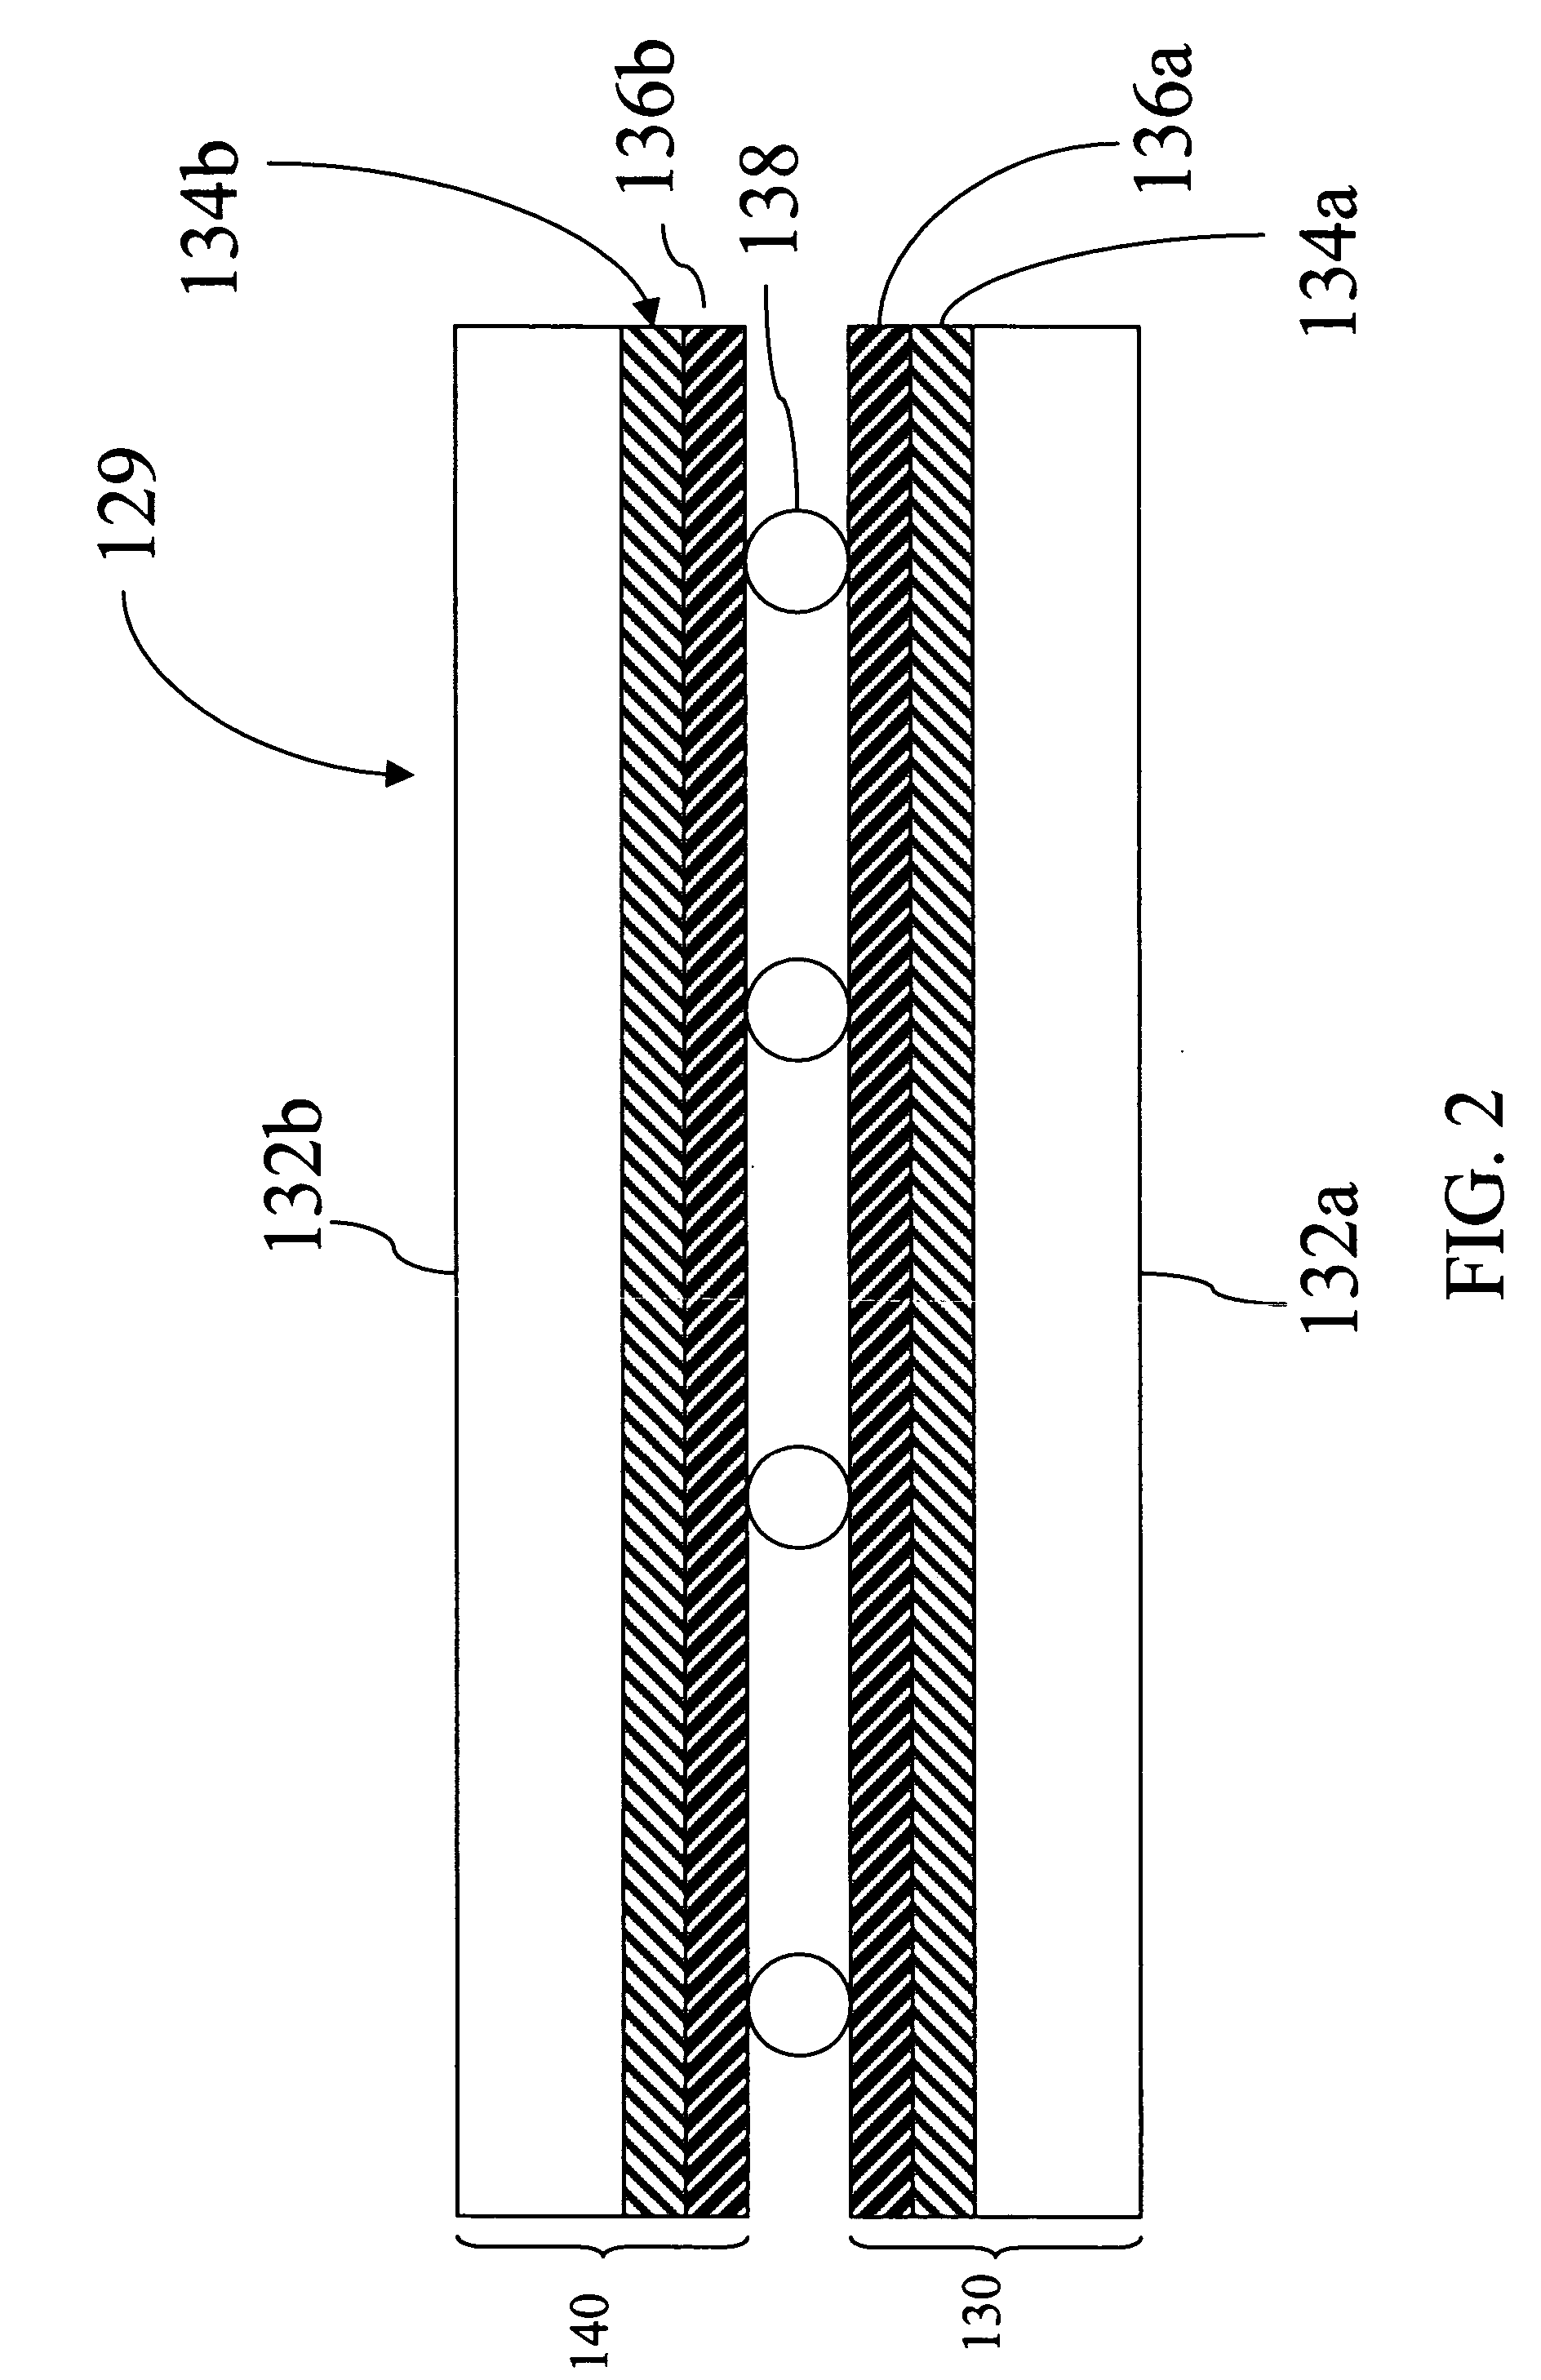 Touchscreen with conductive layer comprising carbon nanotubes